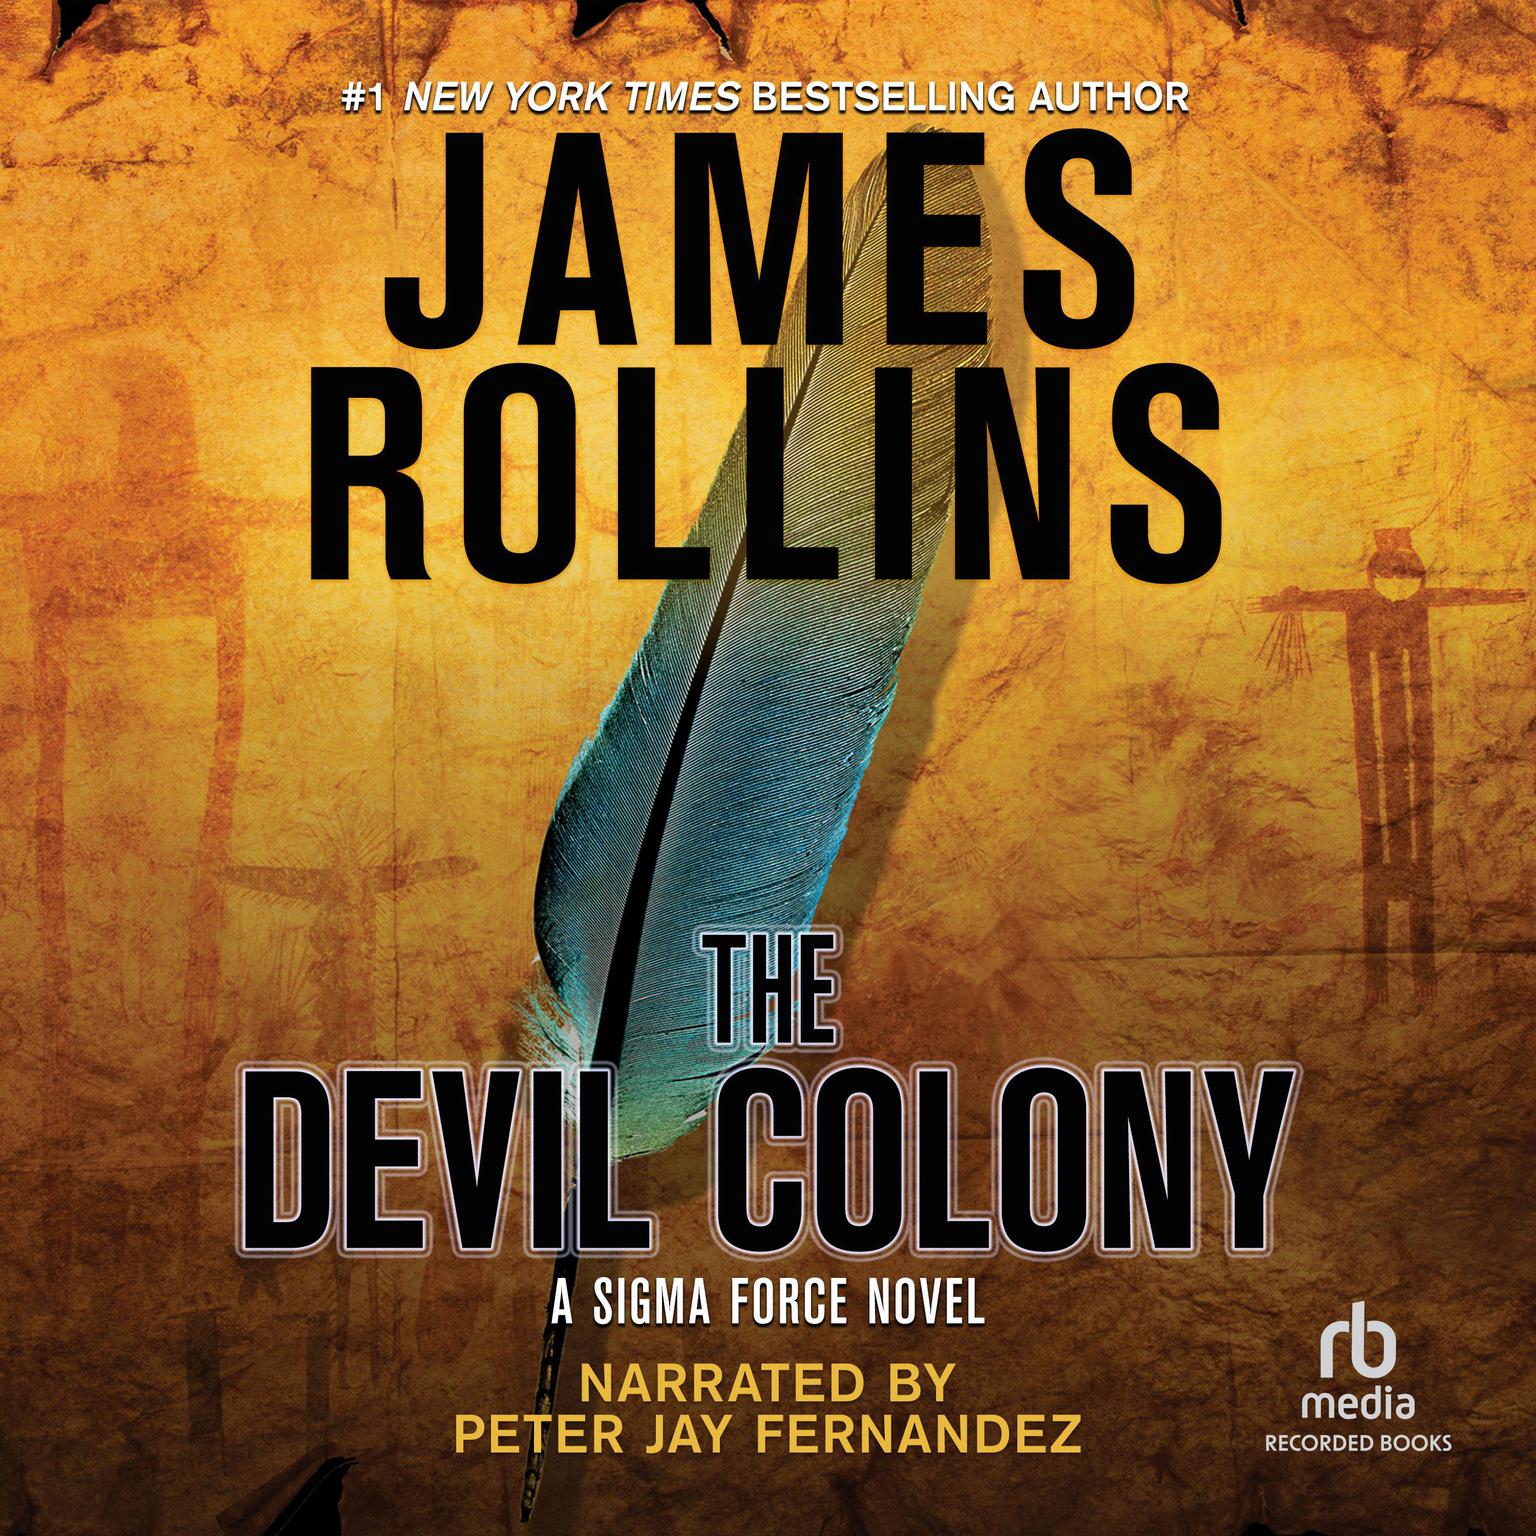 The Devil Colony International Edition Audiobook, by James Rollins